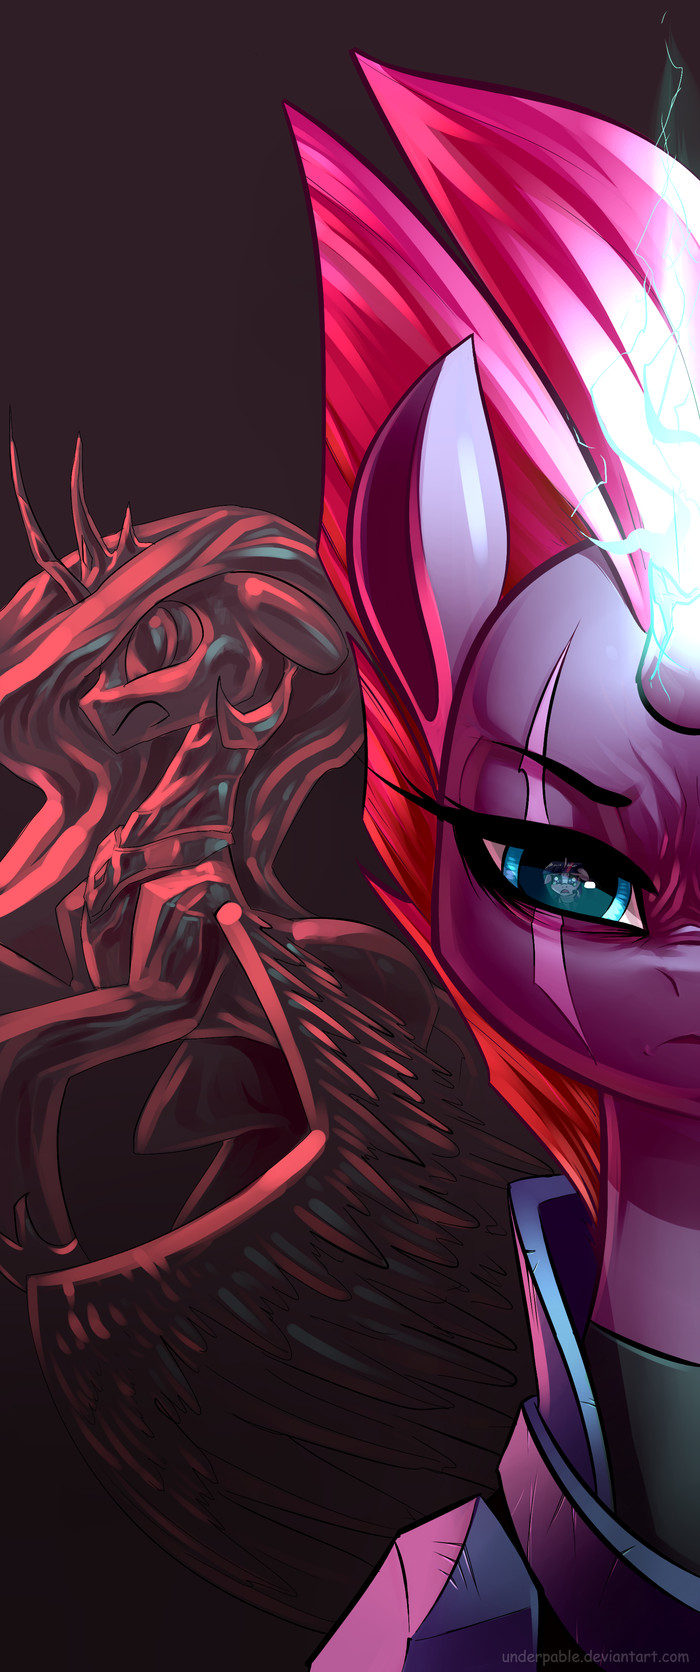 In The Eye Of The Tempest My Little Pony, Ponyart, Tempest Shadow, Princess Celestia, Twilight Sparkle, My Little Pony: The Movie, , Underpable